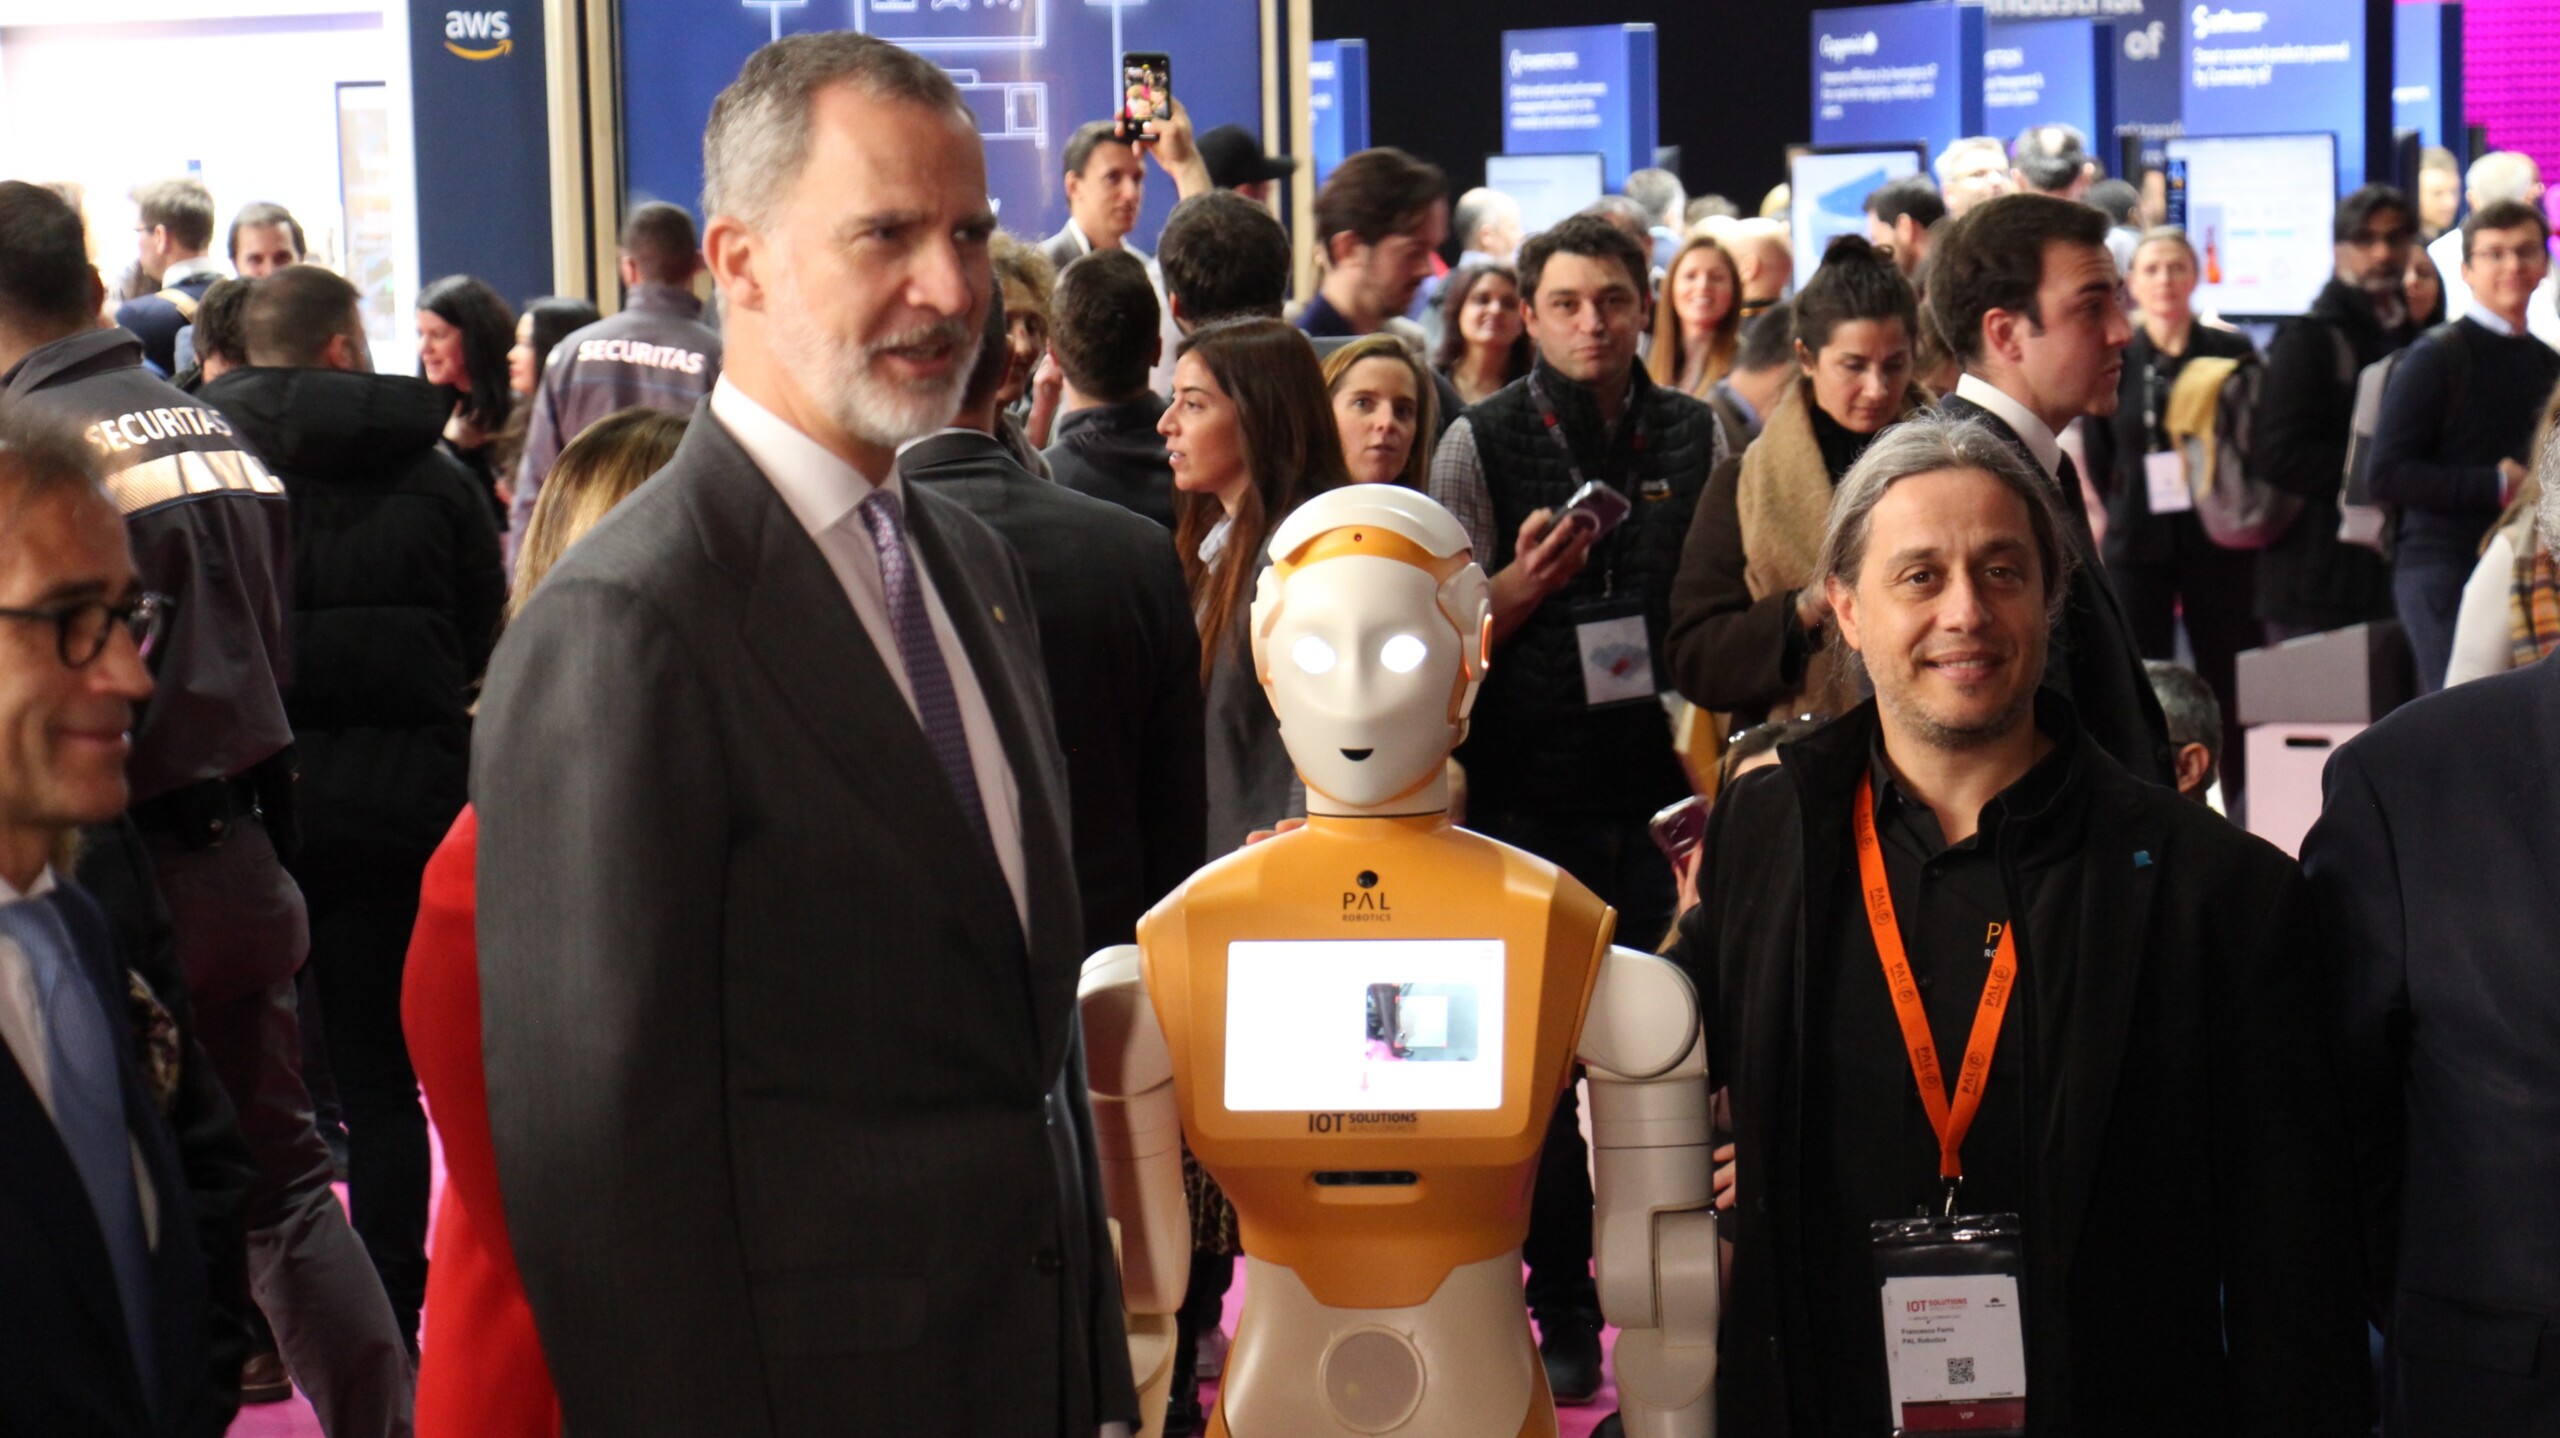 His Majesty the King Felipe VI of Spain and robot ARI